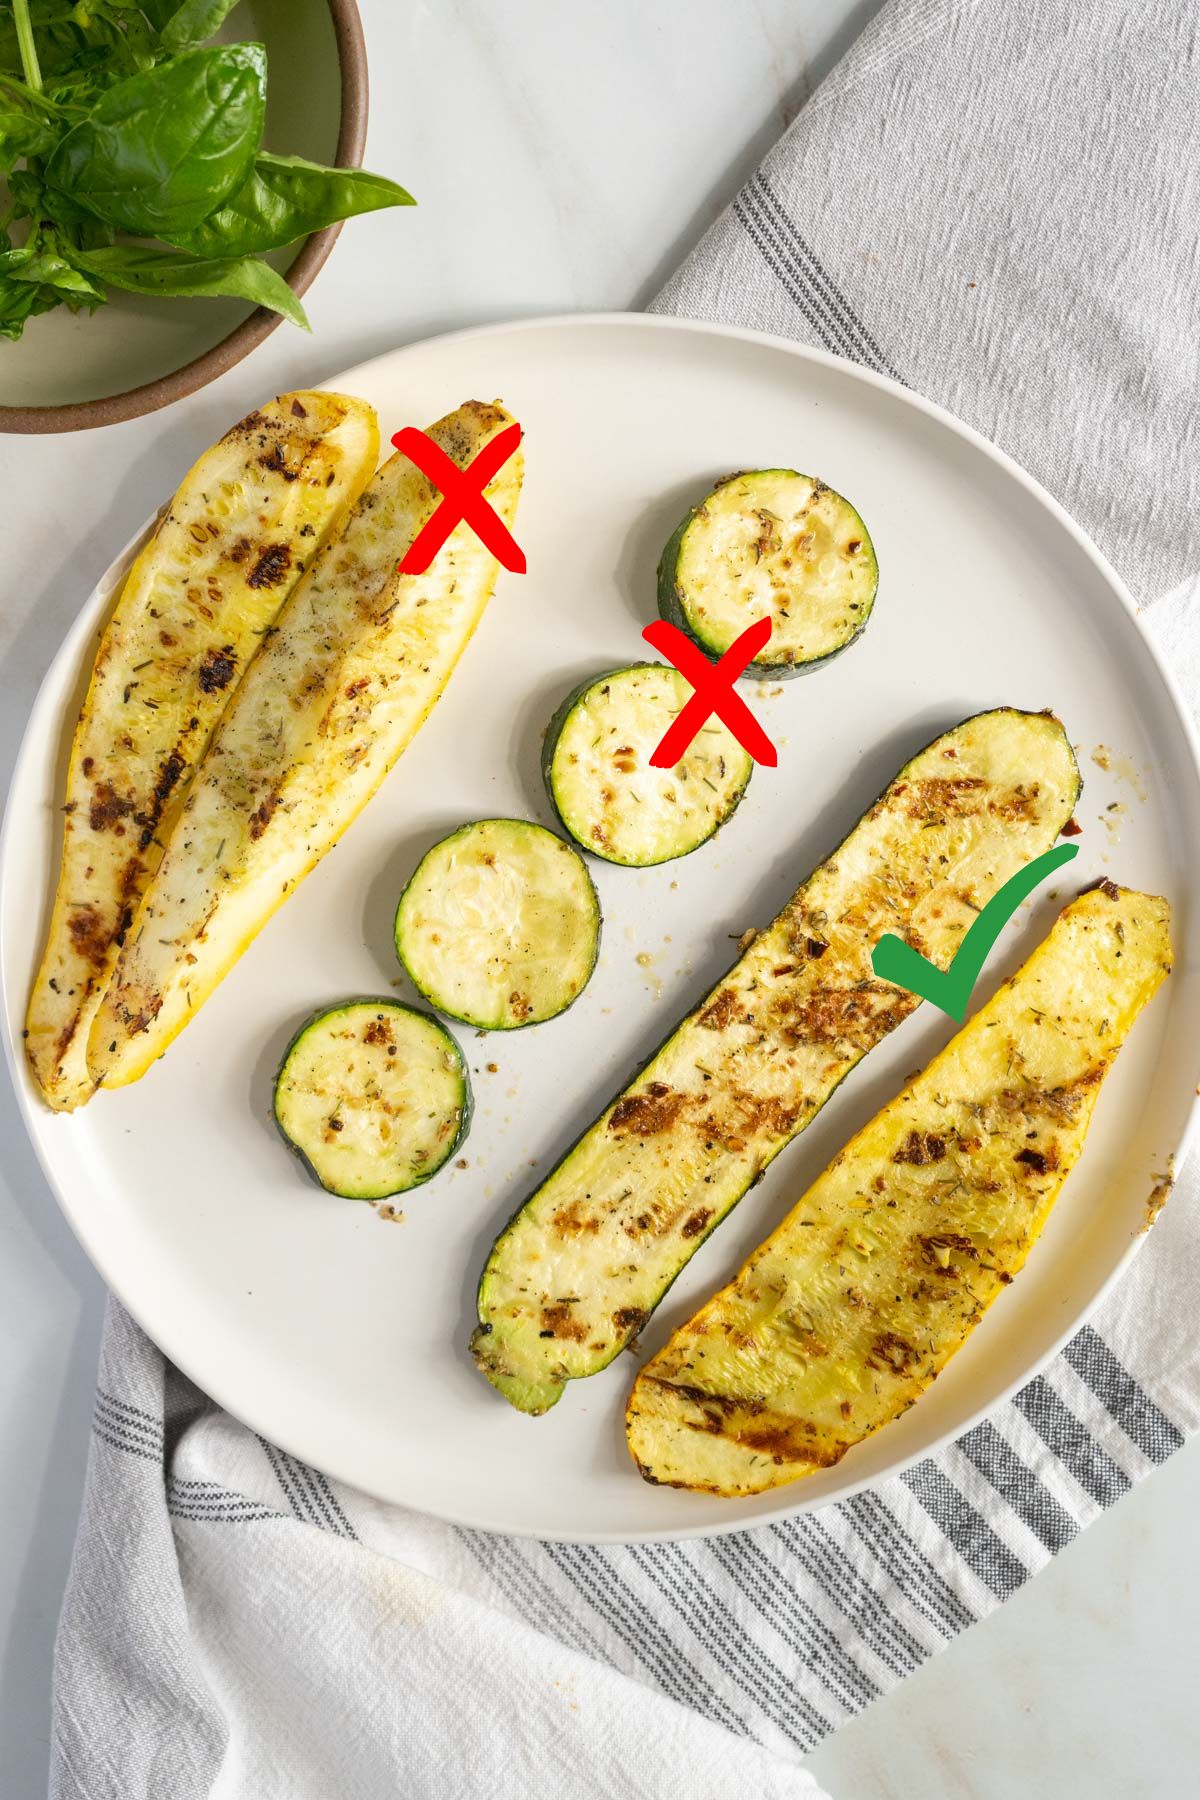 Different shapes of zucchini on a plate showing the results of the recipe testing.